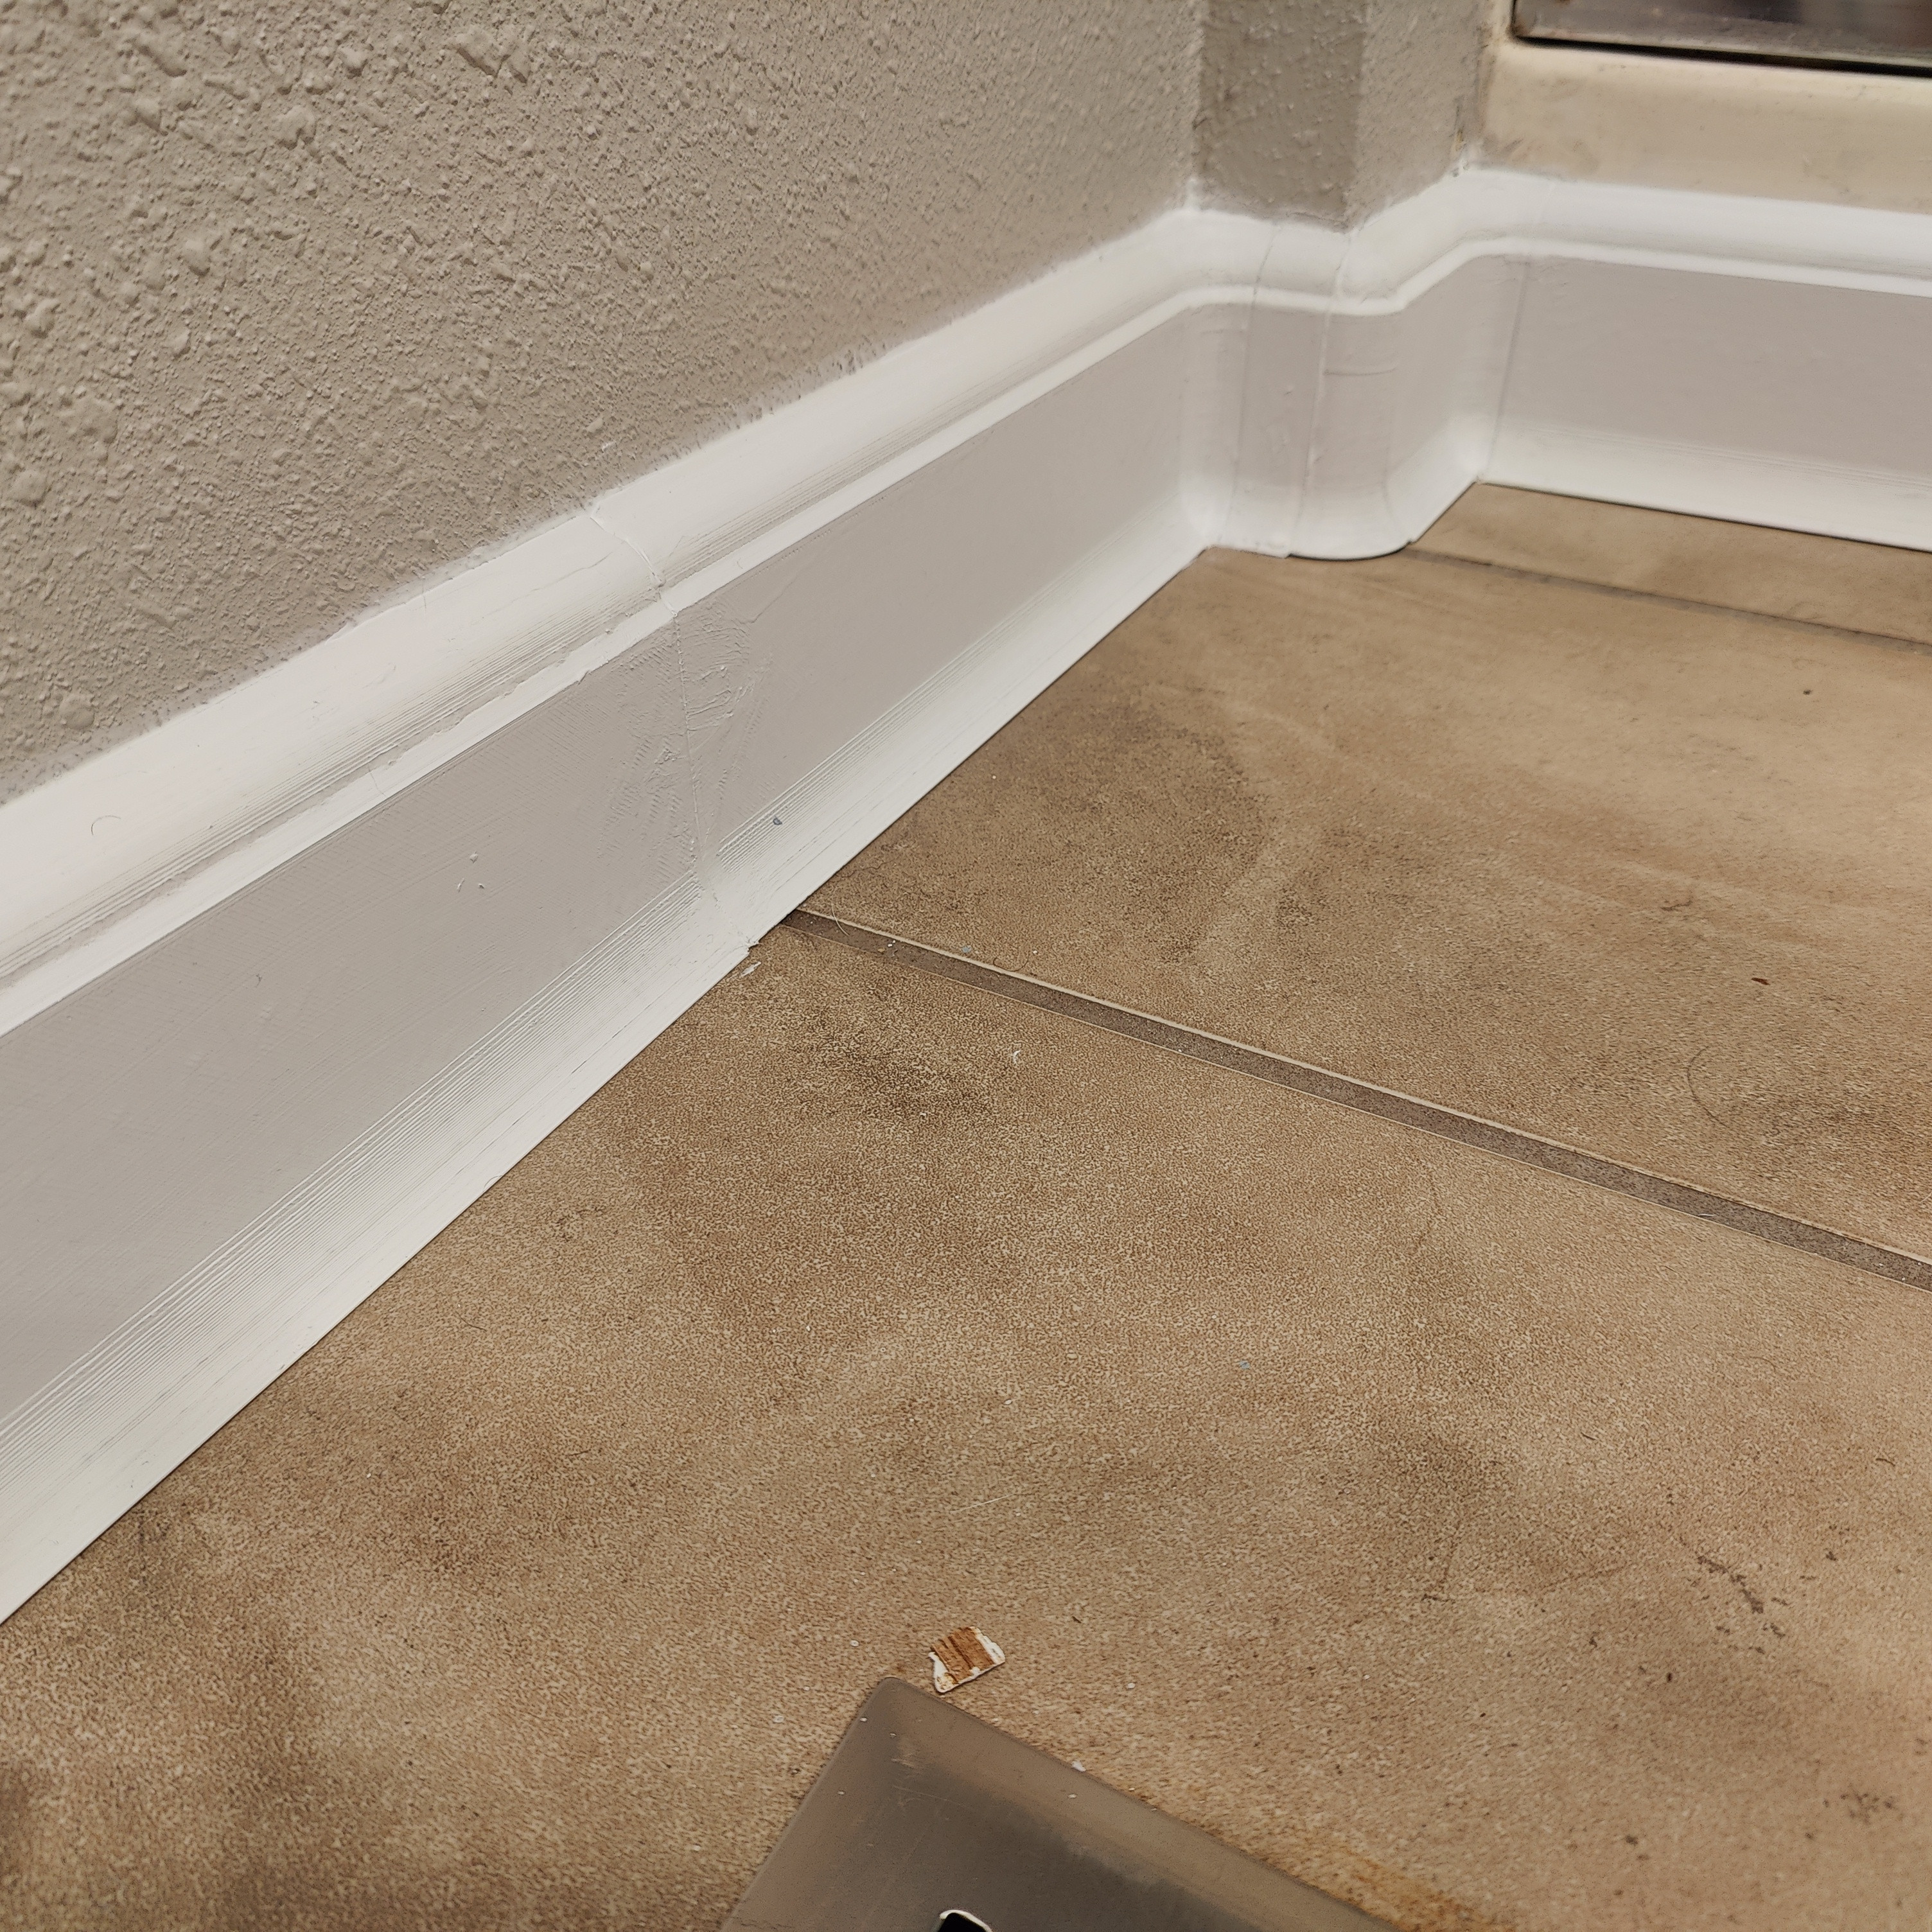 Baseboards for where floor and wall meet